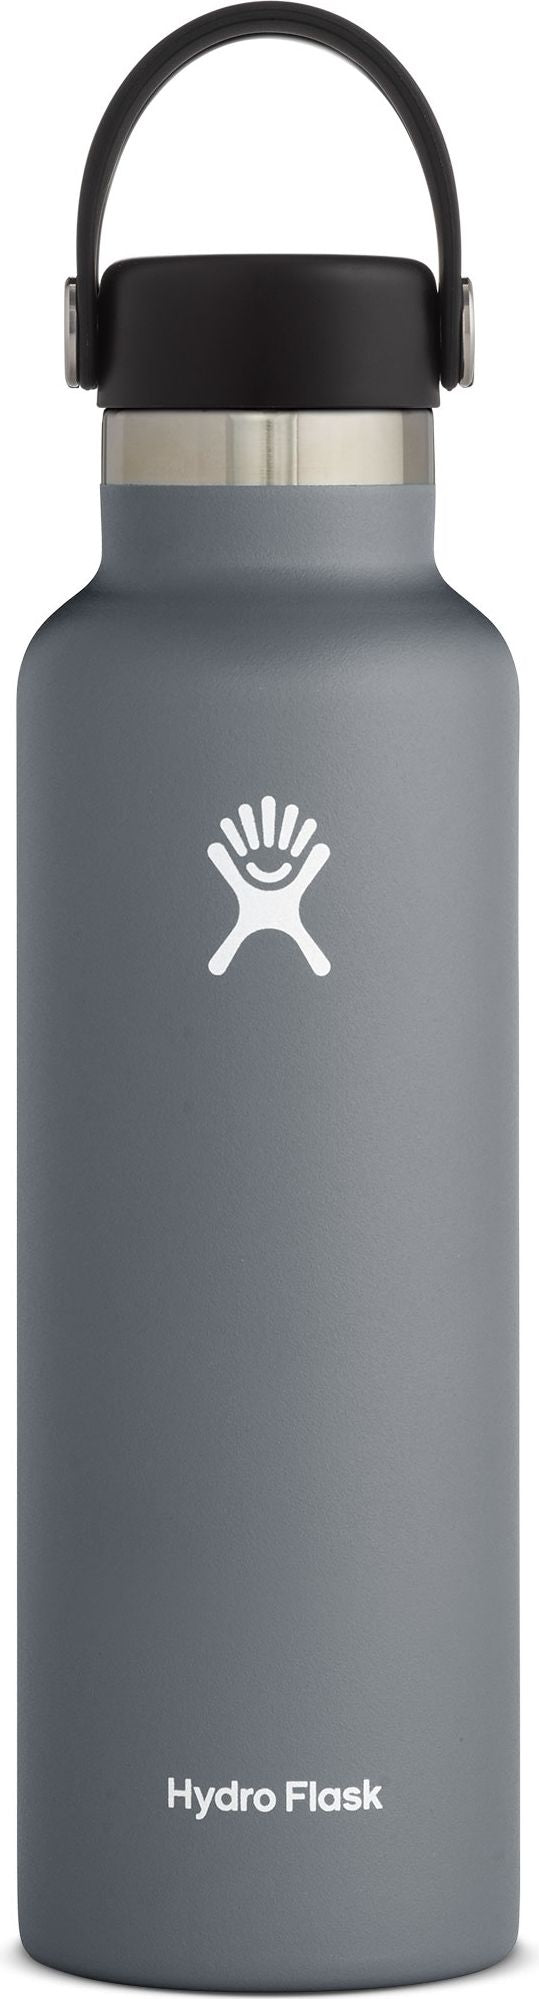 Hydro Flask Accessories 21oz Standard Mouth Stone